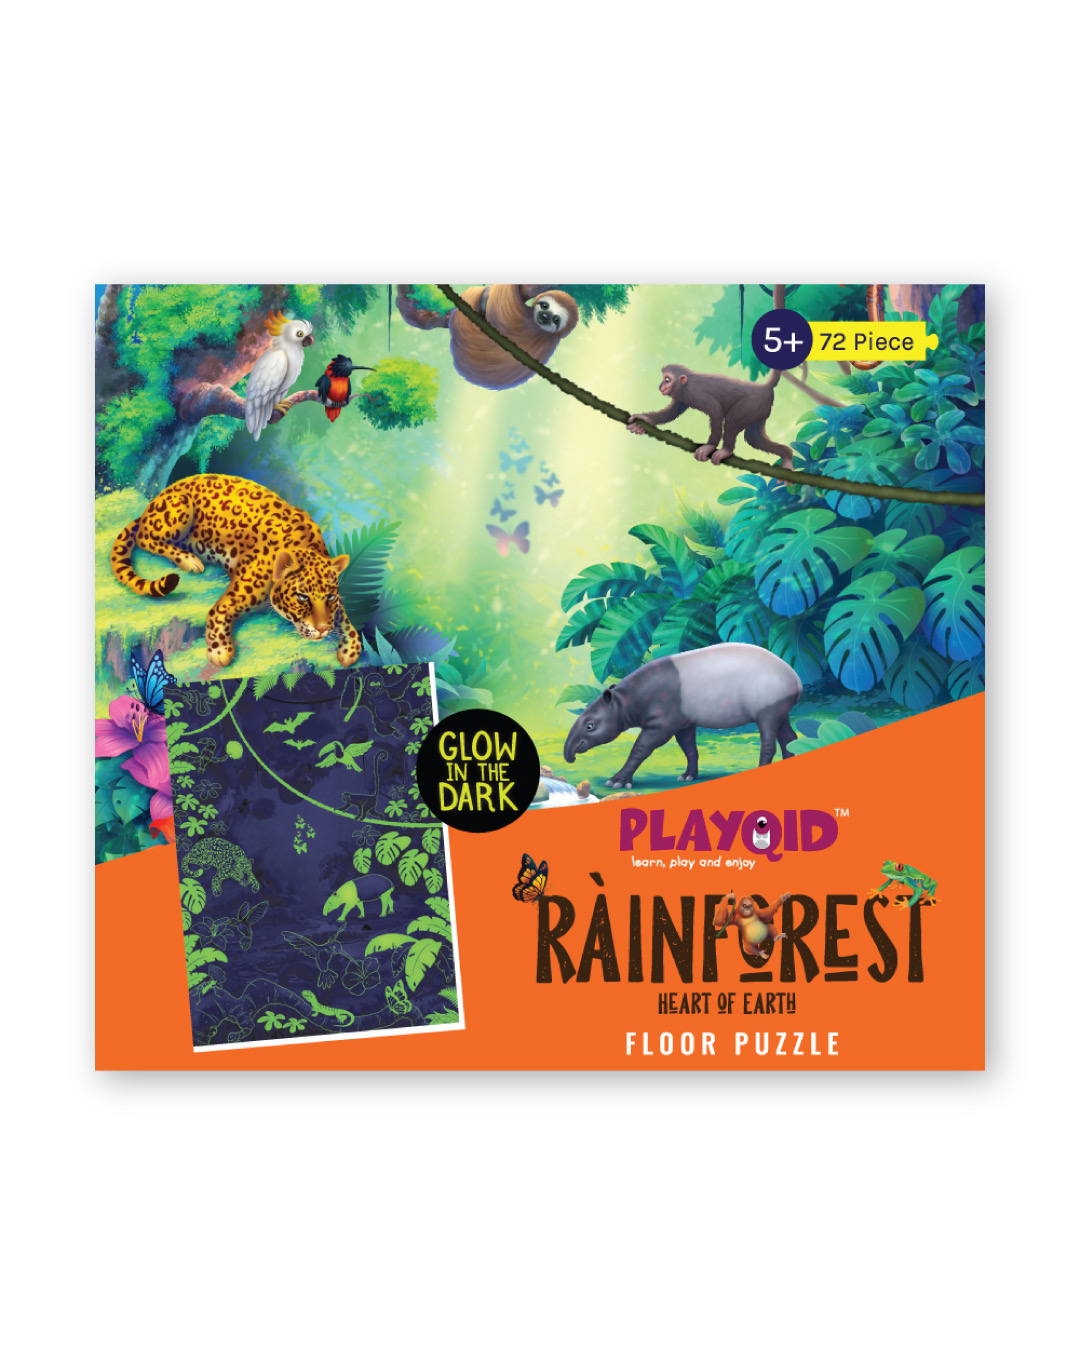 Playqid Rainforest Heart Of Earth Glow In The Dark Jigsaw Floor Puzzle 72 Piece Puzzle That Glows In Dark For Kids Age 5 And Above Size 35 X 48 -